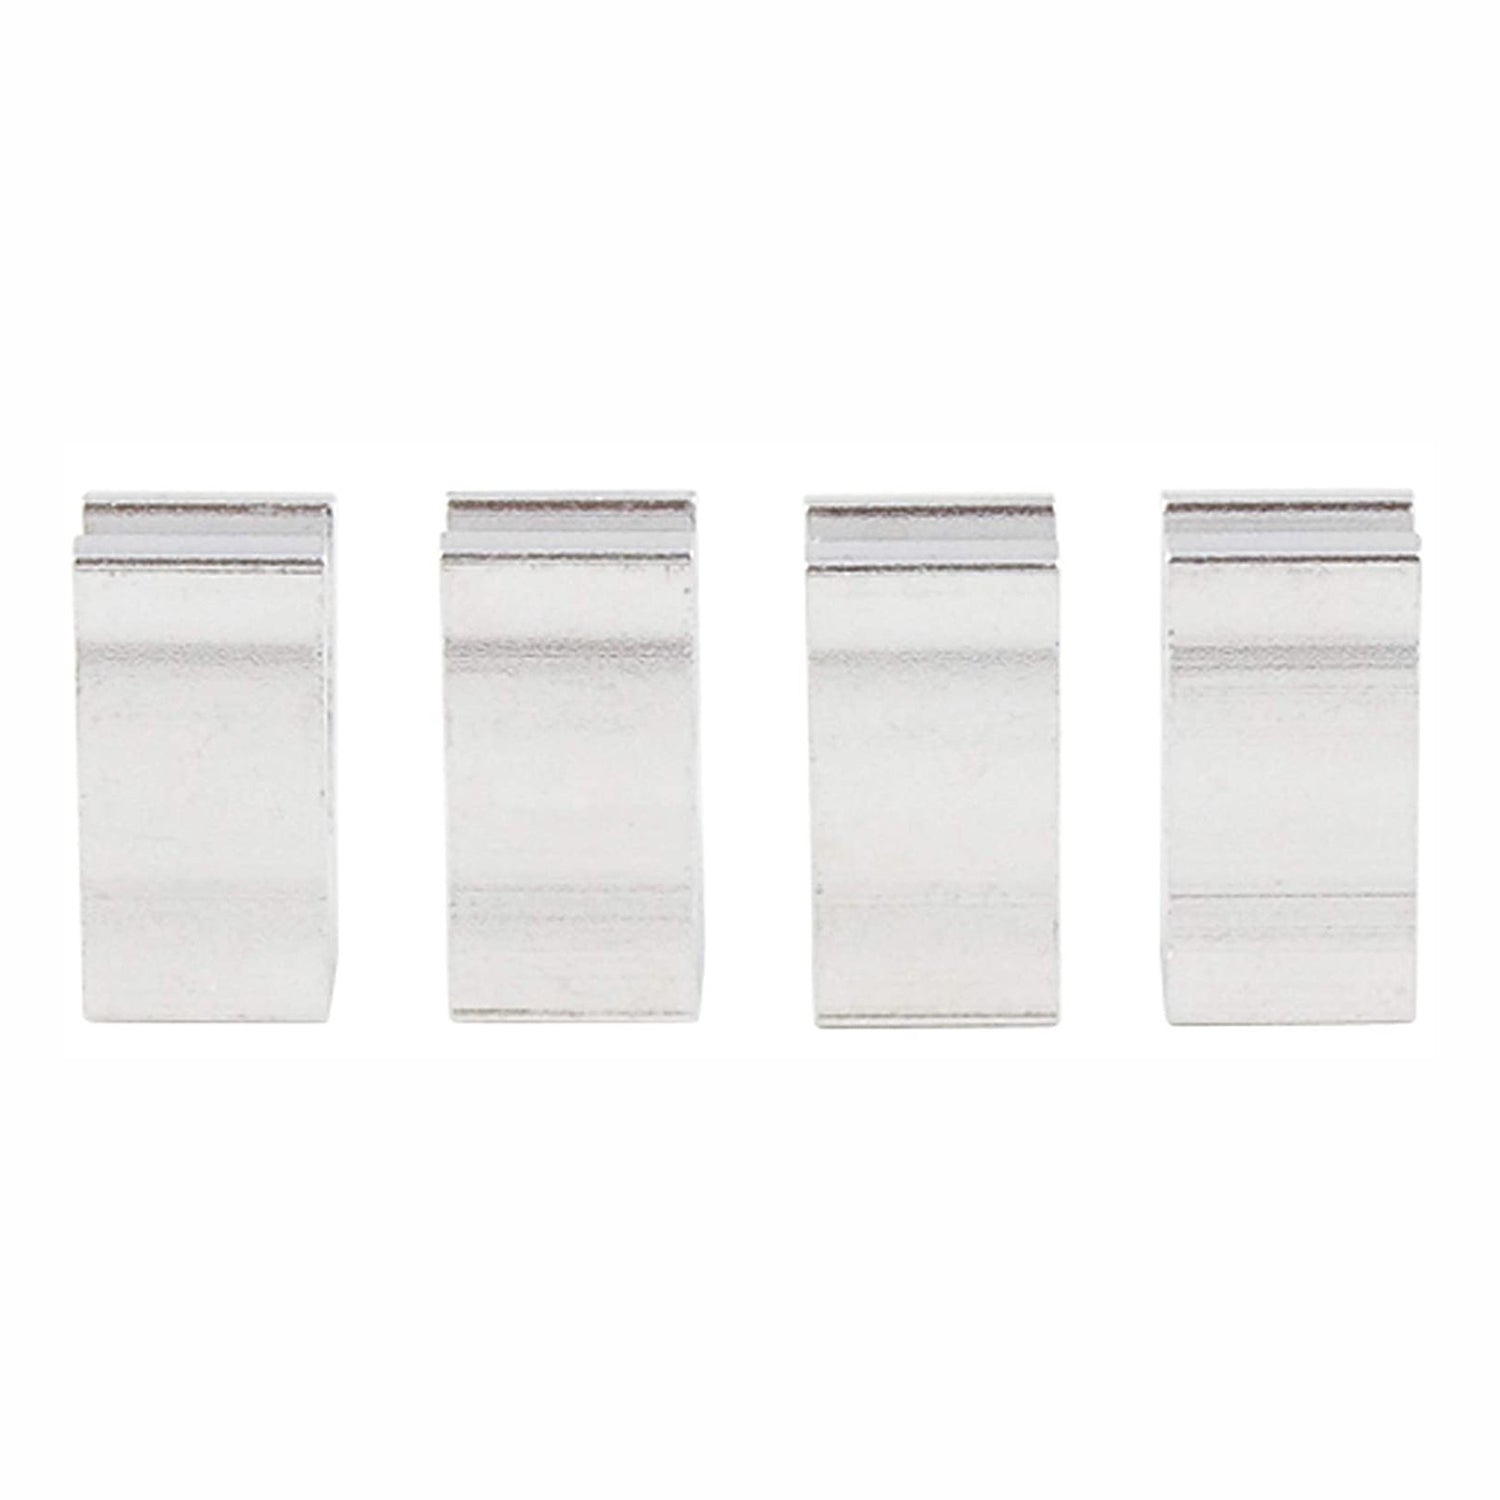 Mopeka 024-1005 AP Products LP Tank Check Spacers (4 Pack)